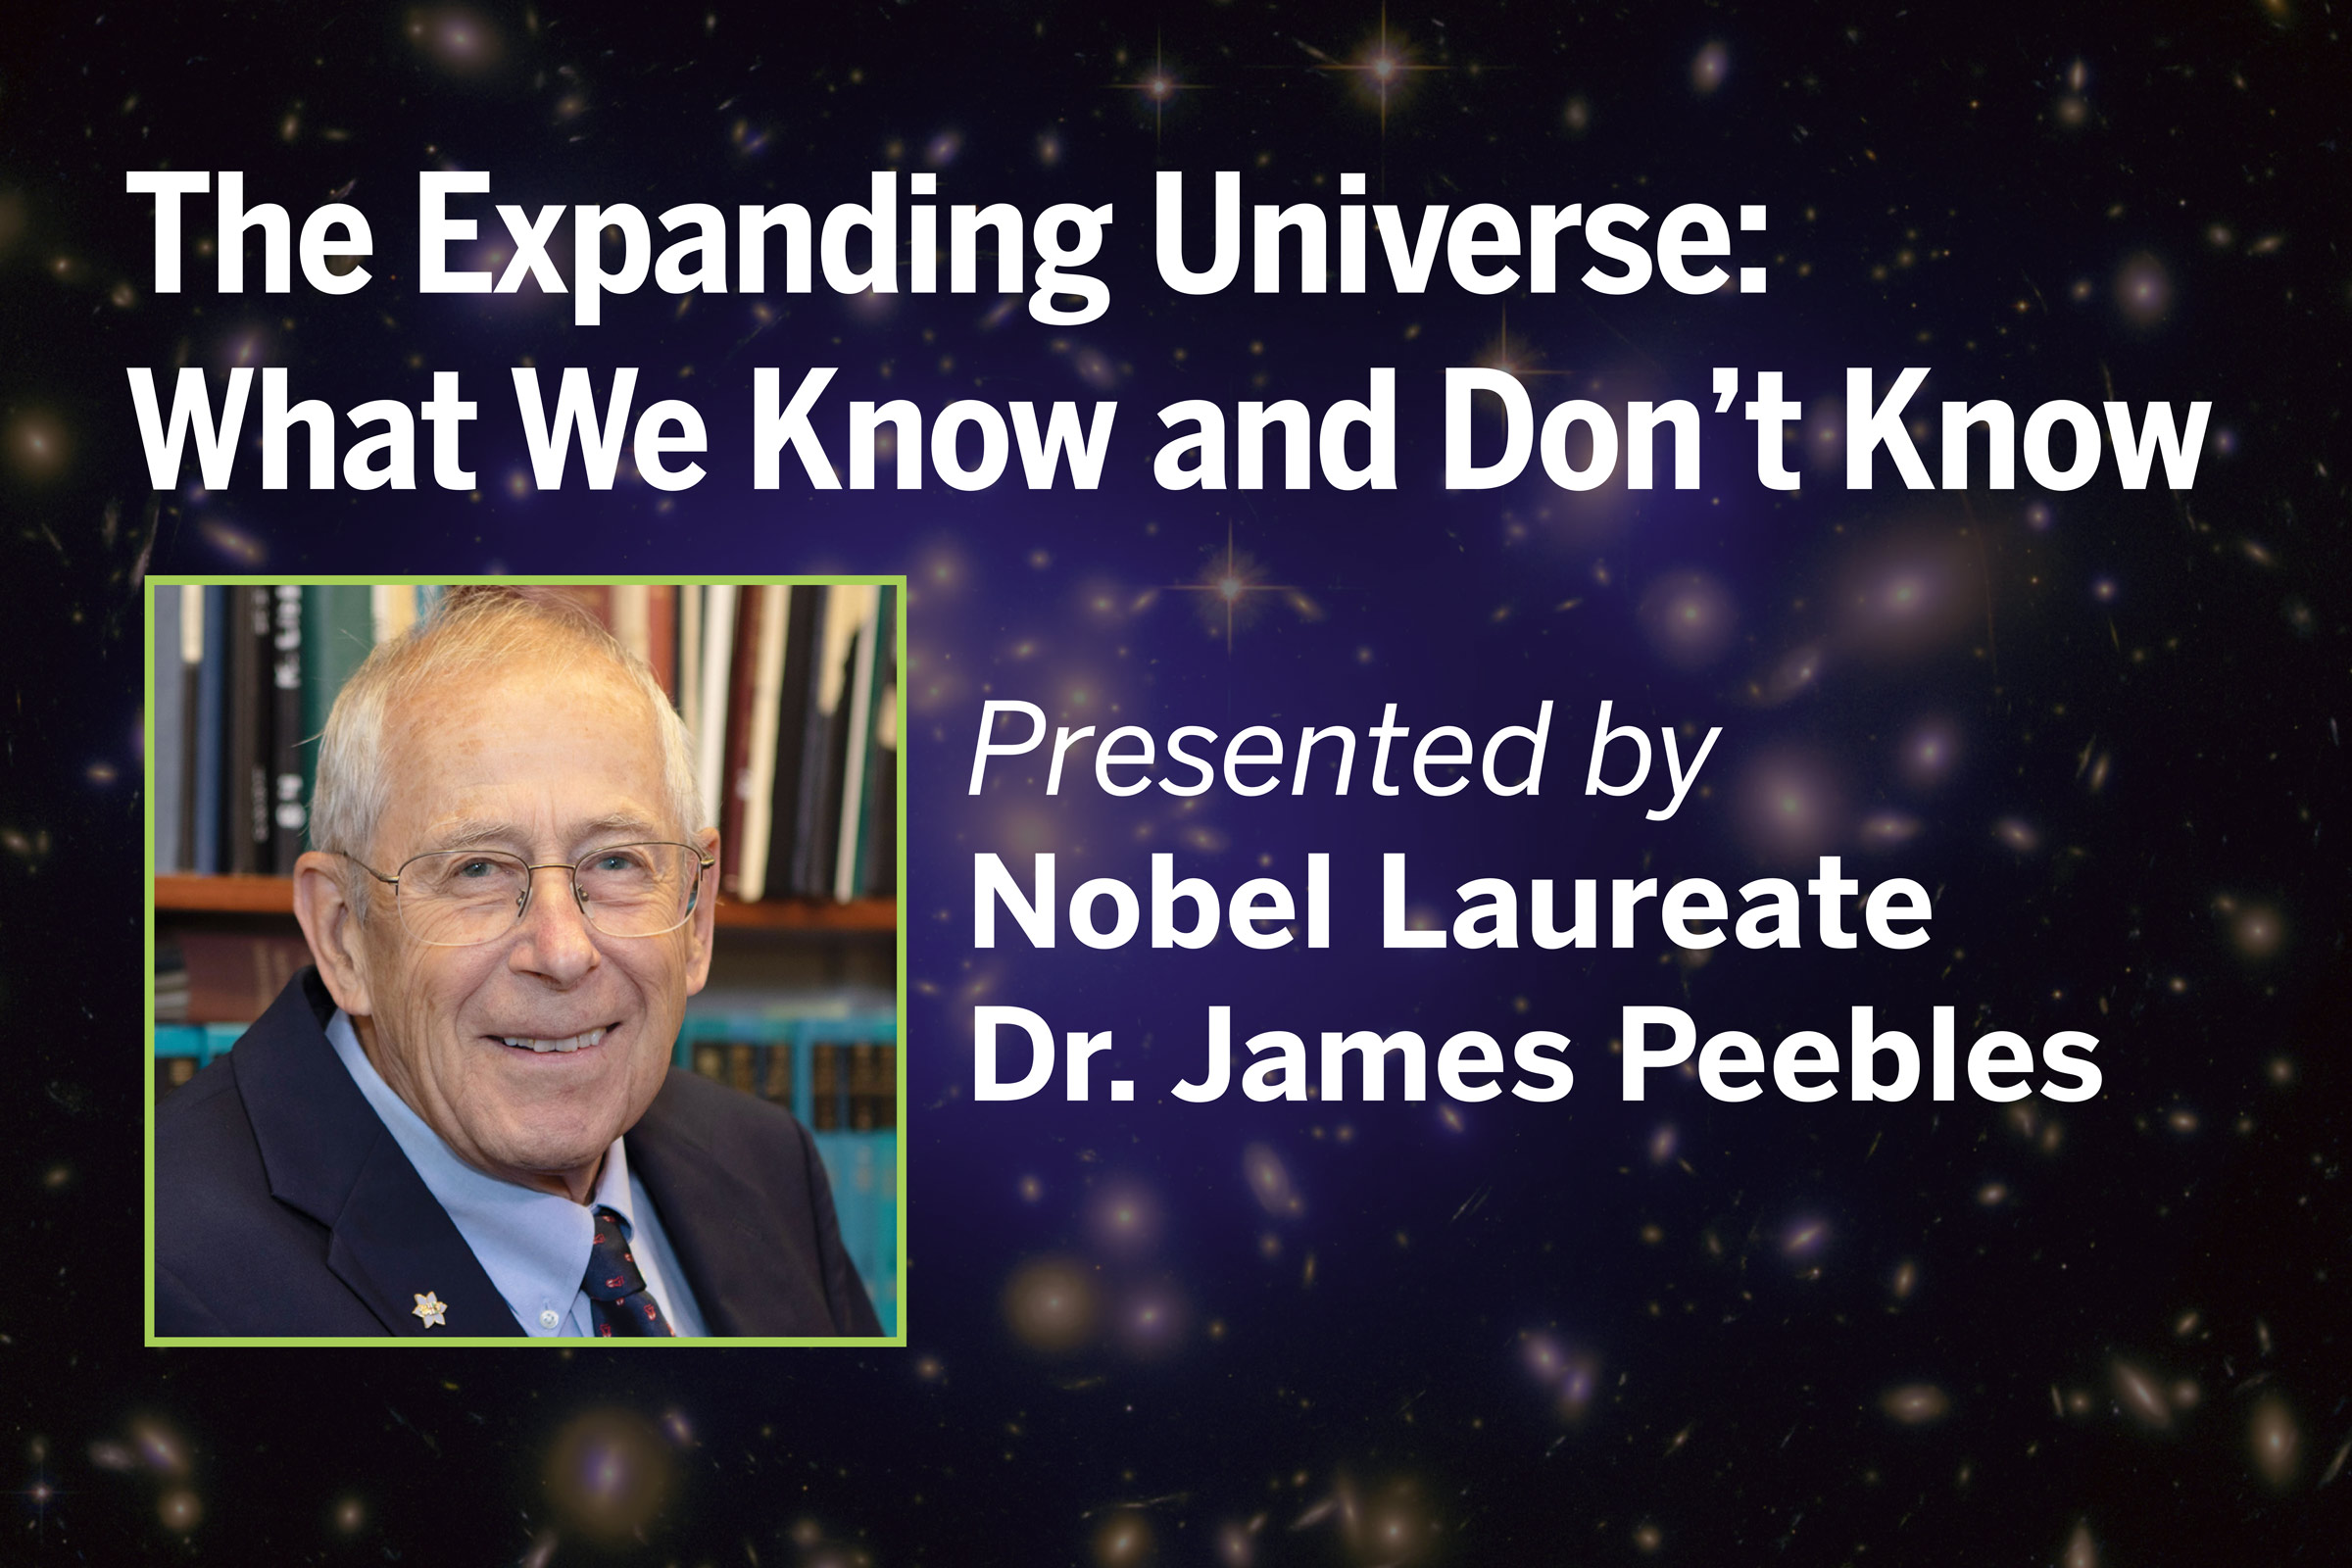 The Expanding Universe: What We Know and Don't Know presented by Nobel laureate Dr. James Peebles